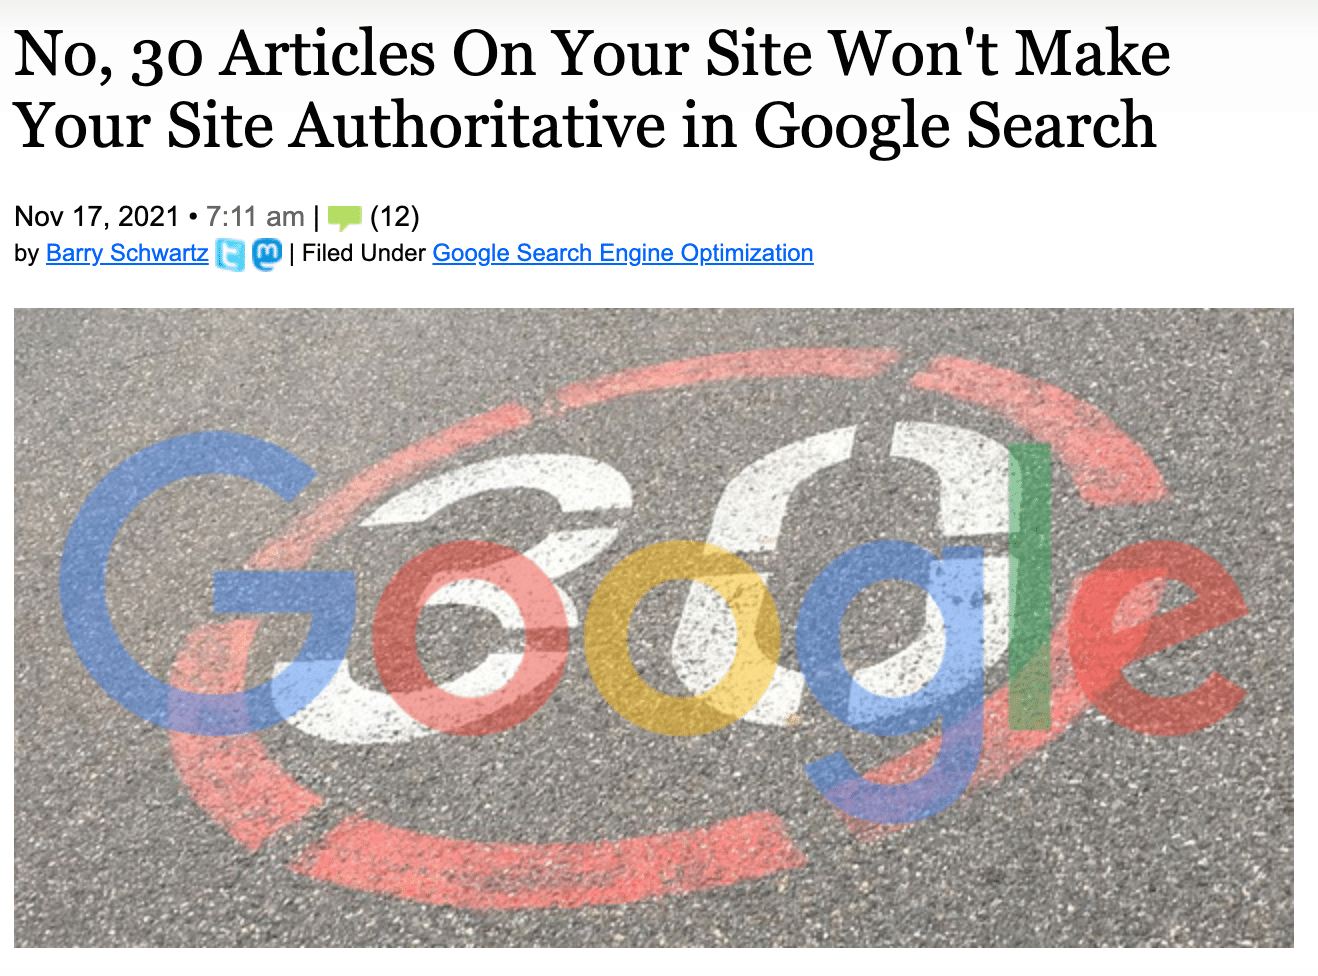 SaaS blog topic: No, 30 articles on your site won't make your site authoritative in Google Search